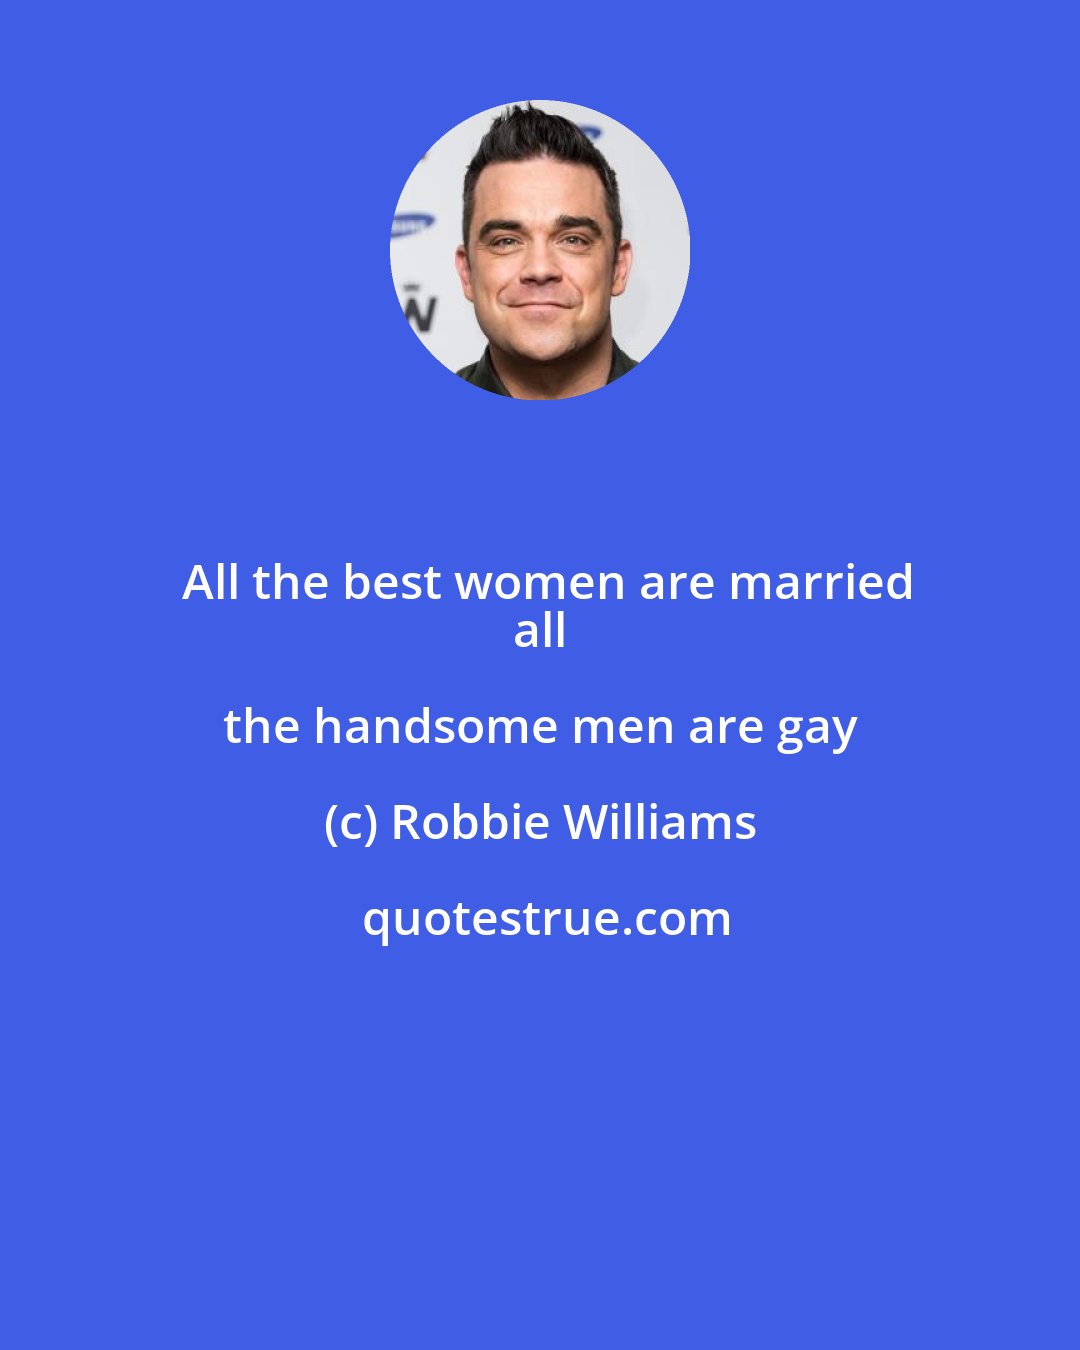 Robbie Williams: All the best women are married
 all the handsome men are gay